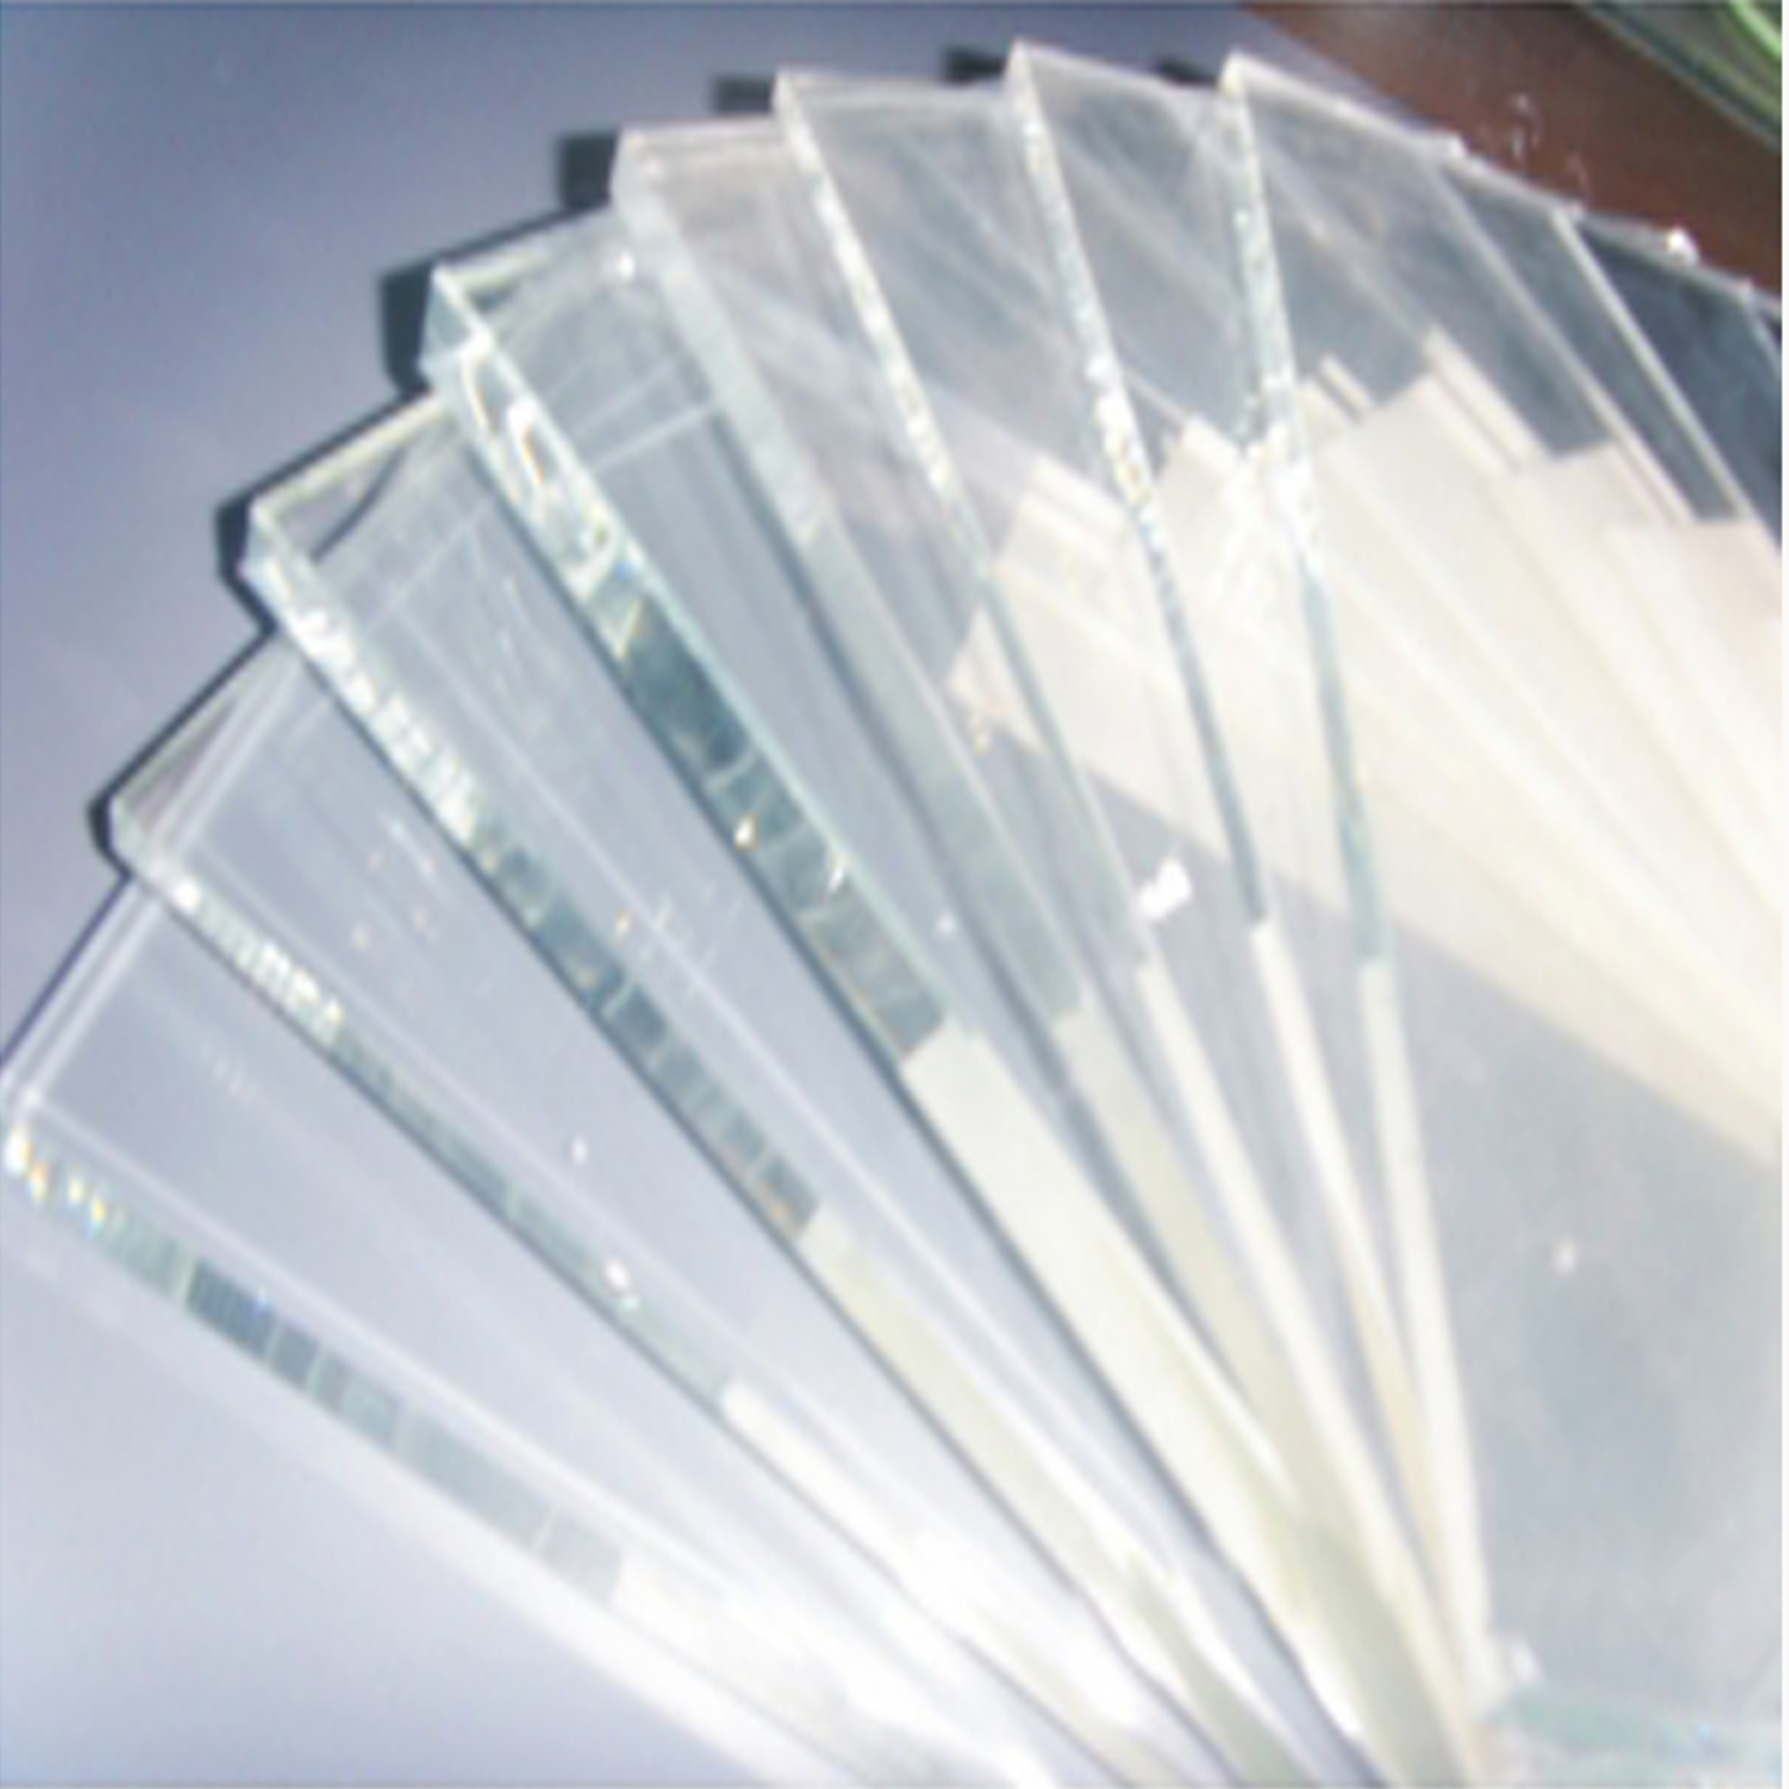 Low Iron Glass, Ultra Clear Glass, Tempered Glass Wholesaler